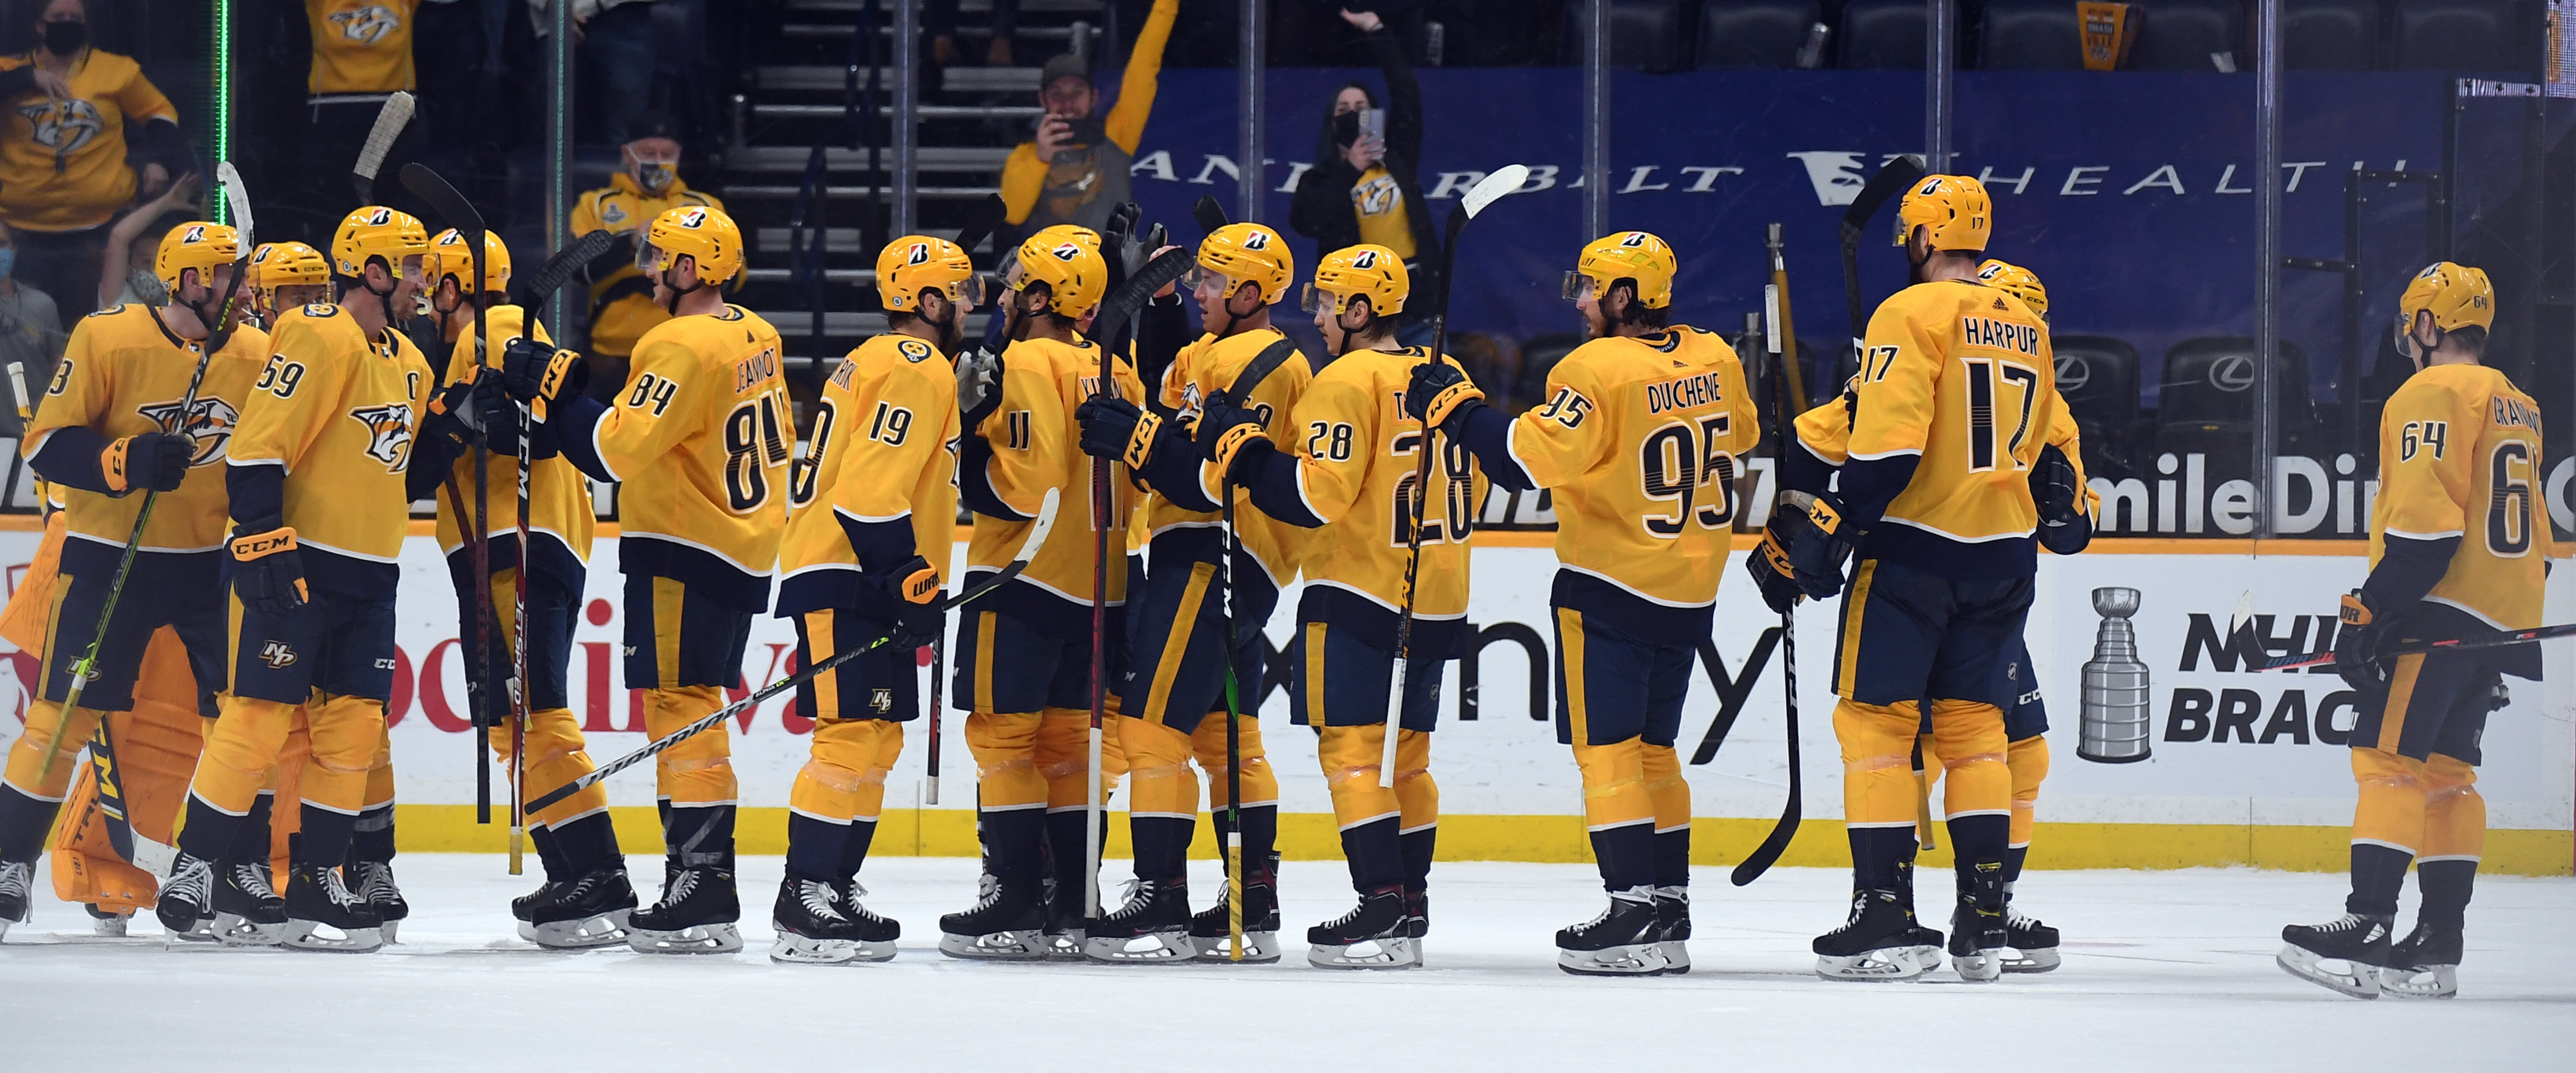 The Predators are postseason bound! But are they prolonging the inevitable?